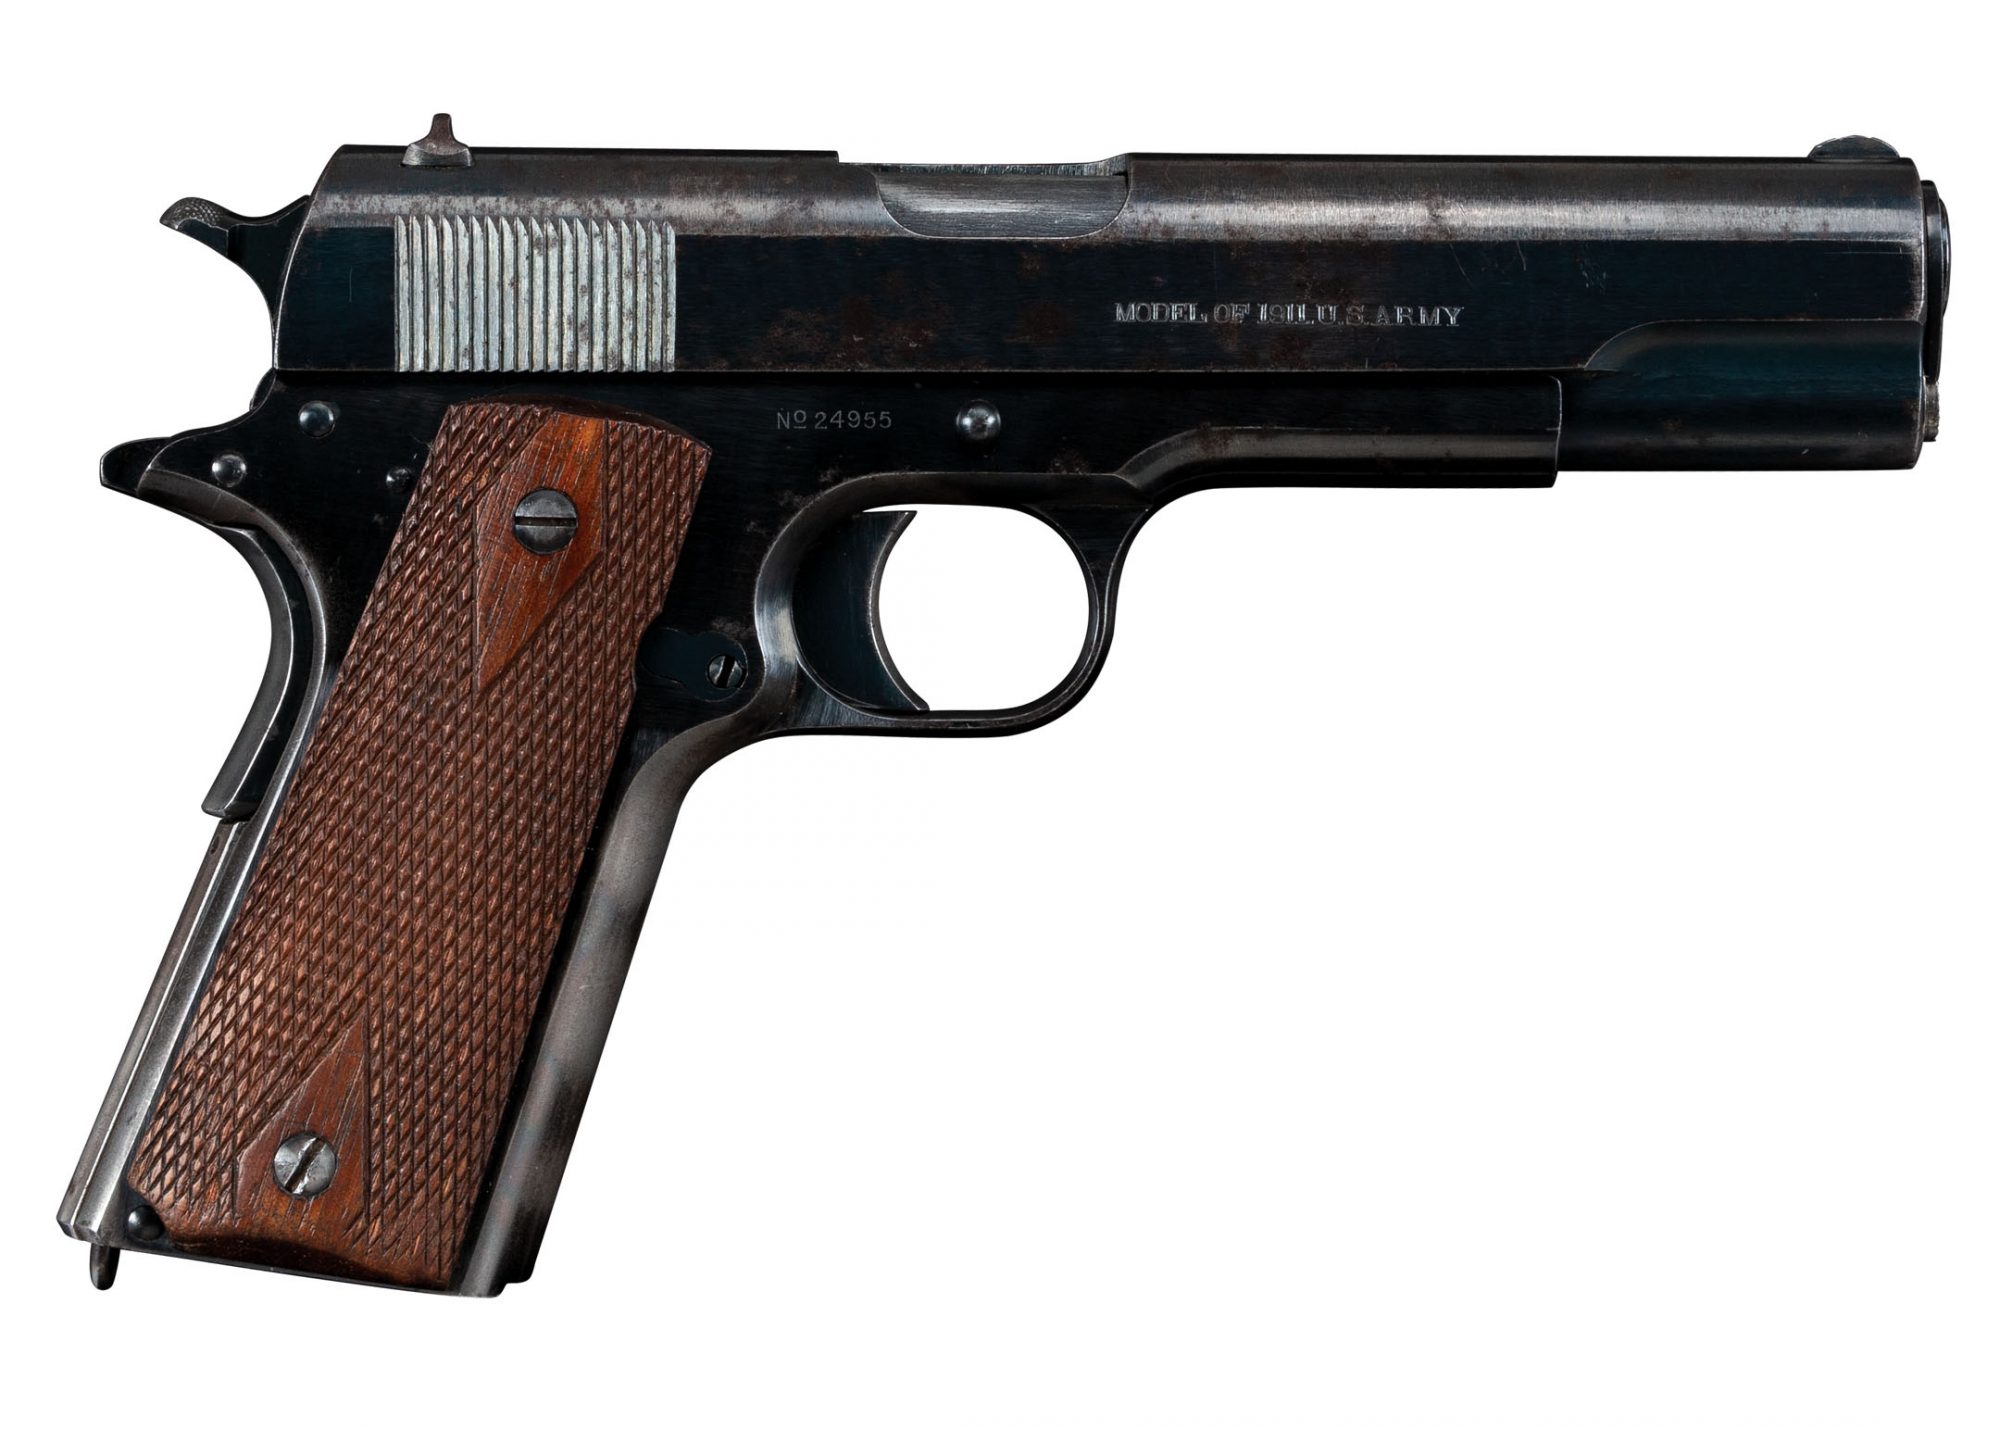 Photo of a Colt Model 1911 U.S. Army from 1913, before restoration services performed by Turnbull Restoration of Bloomfield, NY